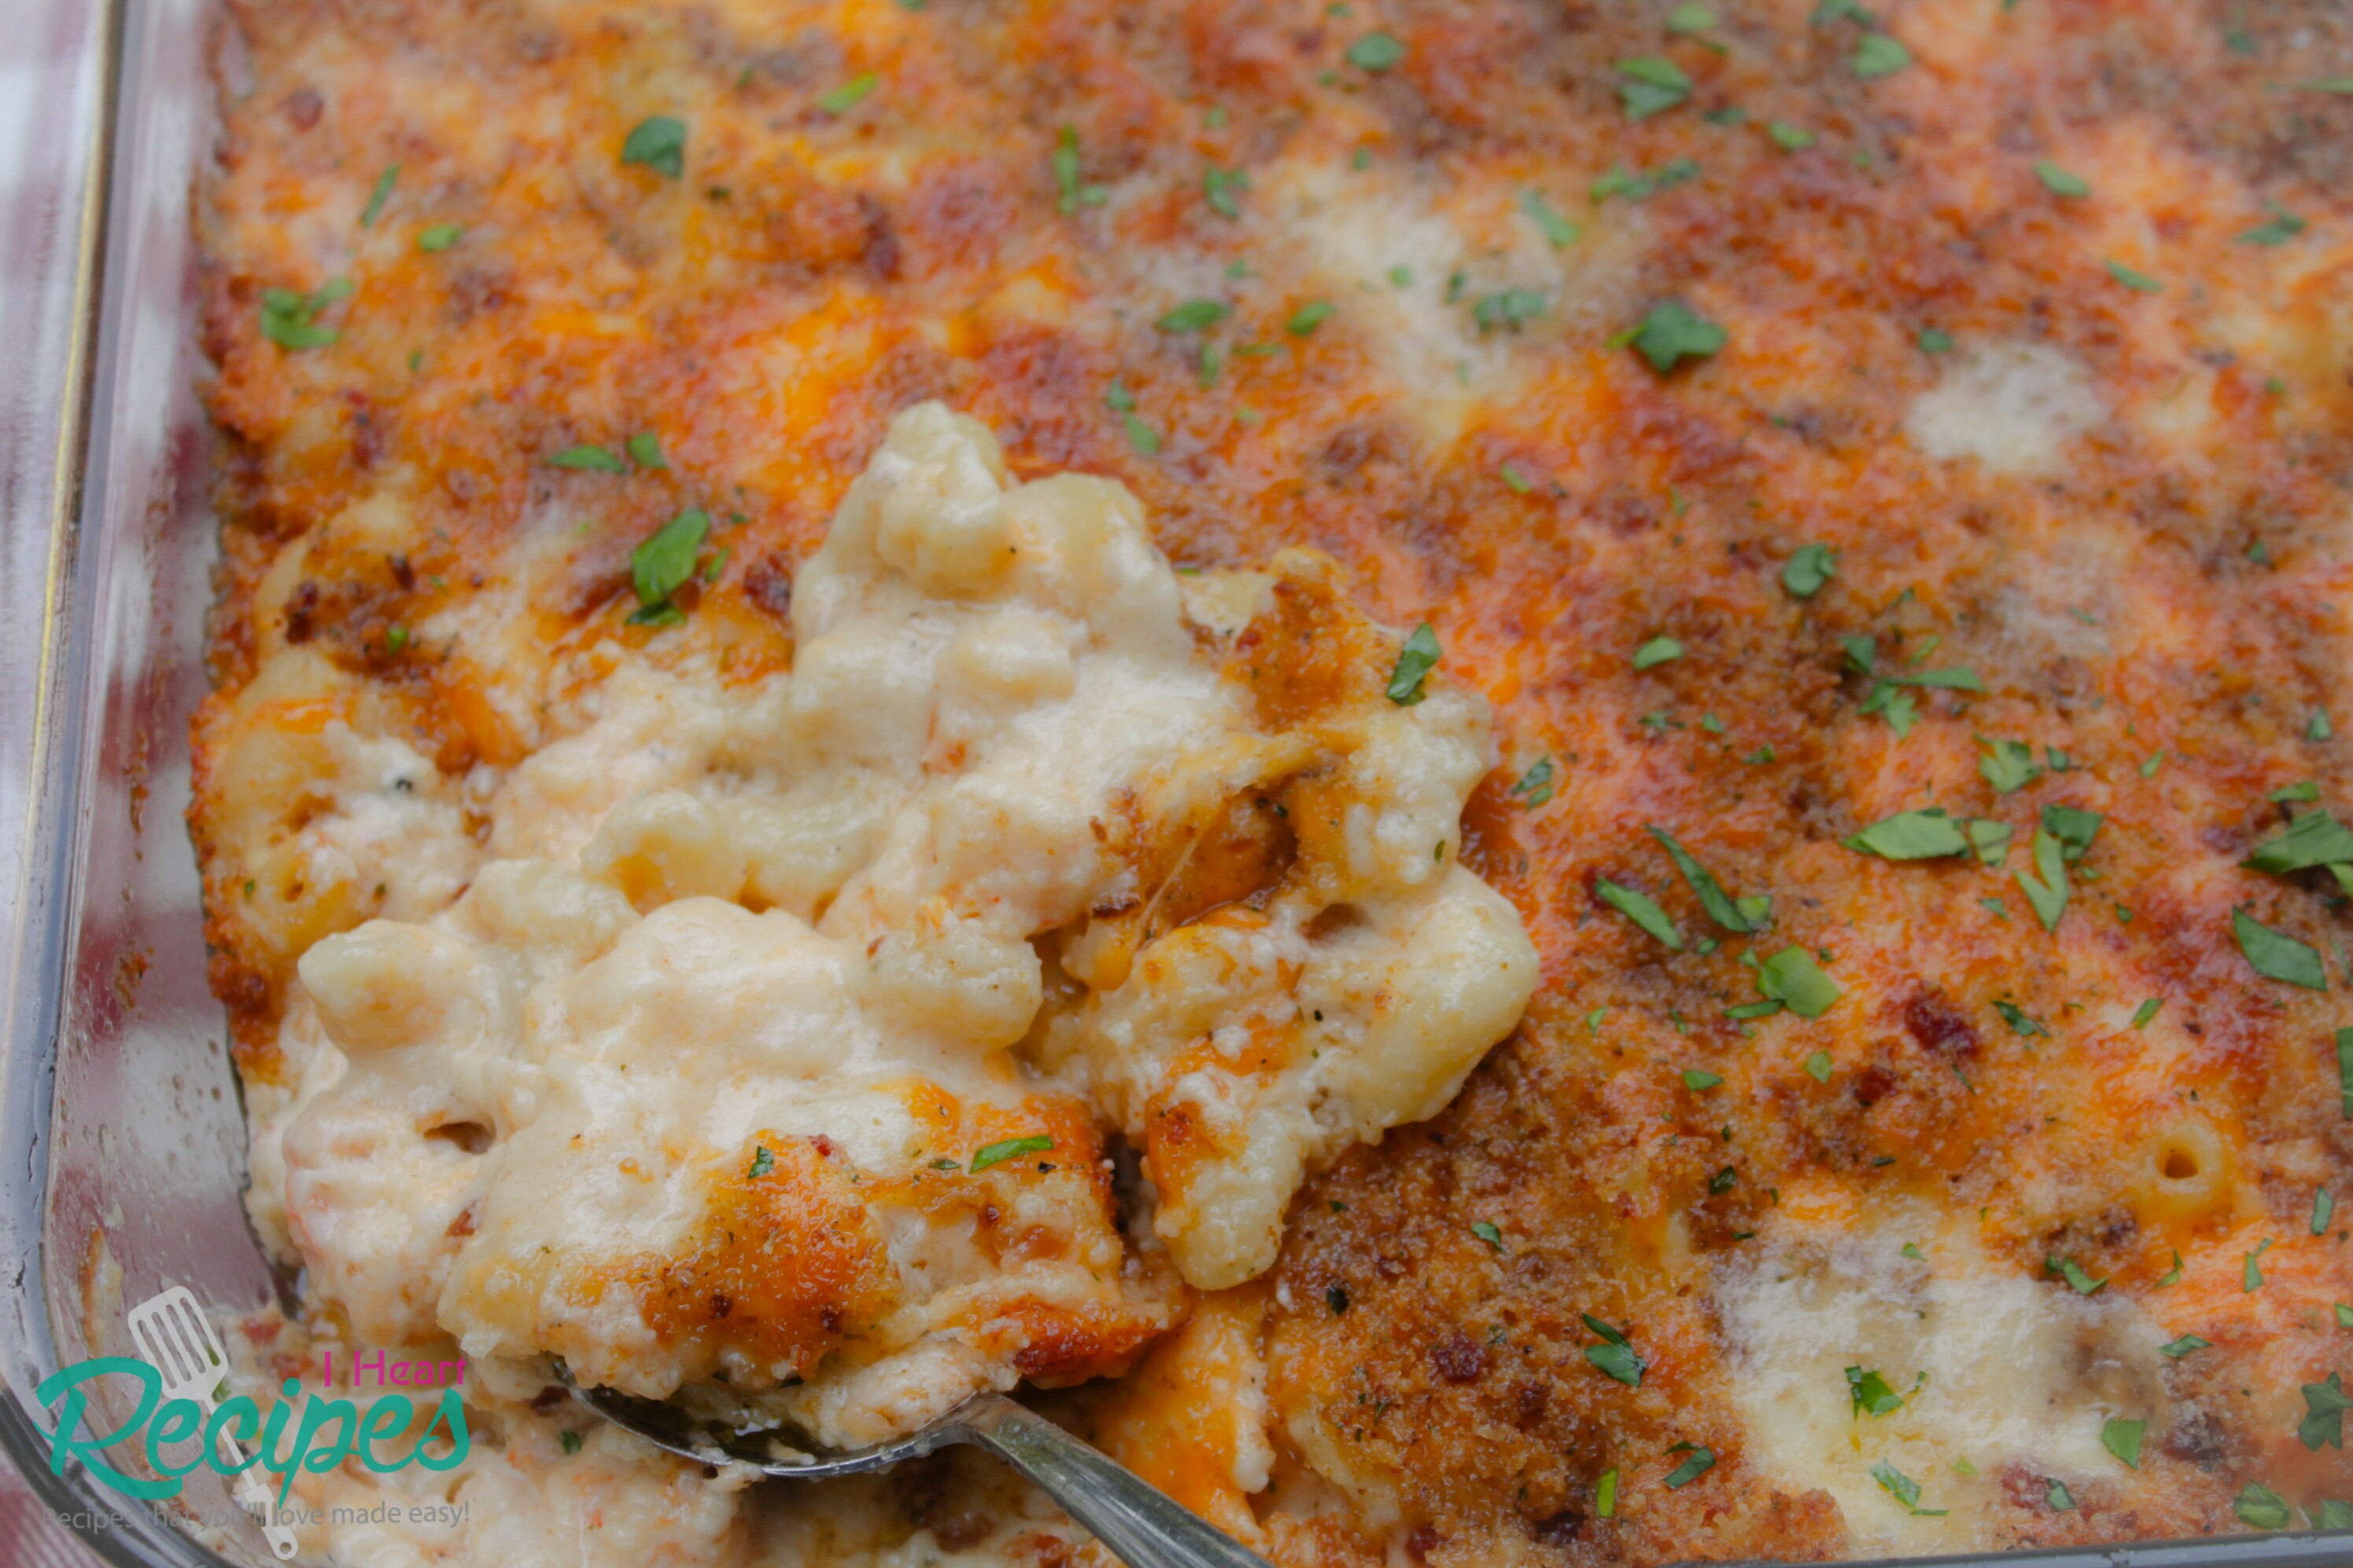 A close up image of a glass casserole dish filled with creamy homemade lobster mac and cheese. Tender pasta covered in a homemade cheese sauce and topped with golden brown bacon breadcrumb topping.